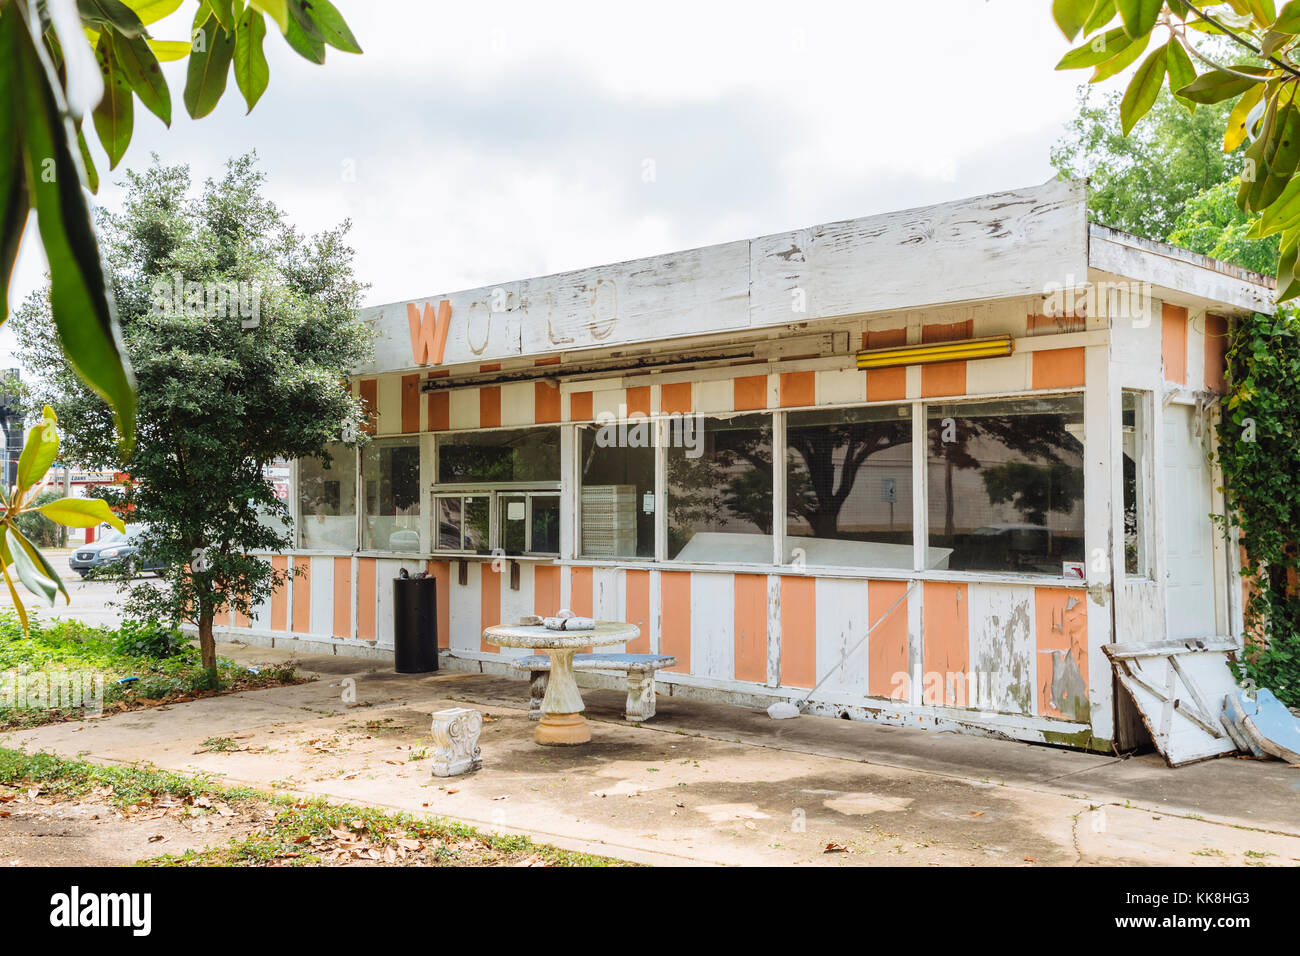 Closed and abandoned small business, donut shop, in Fort Walton Beach Florida, USA. Stock Photo